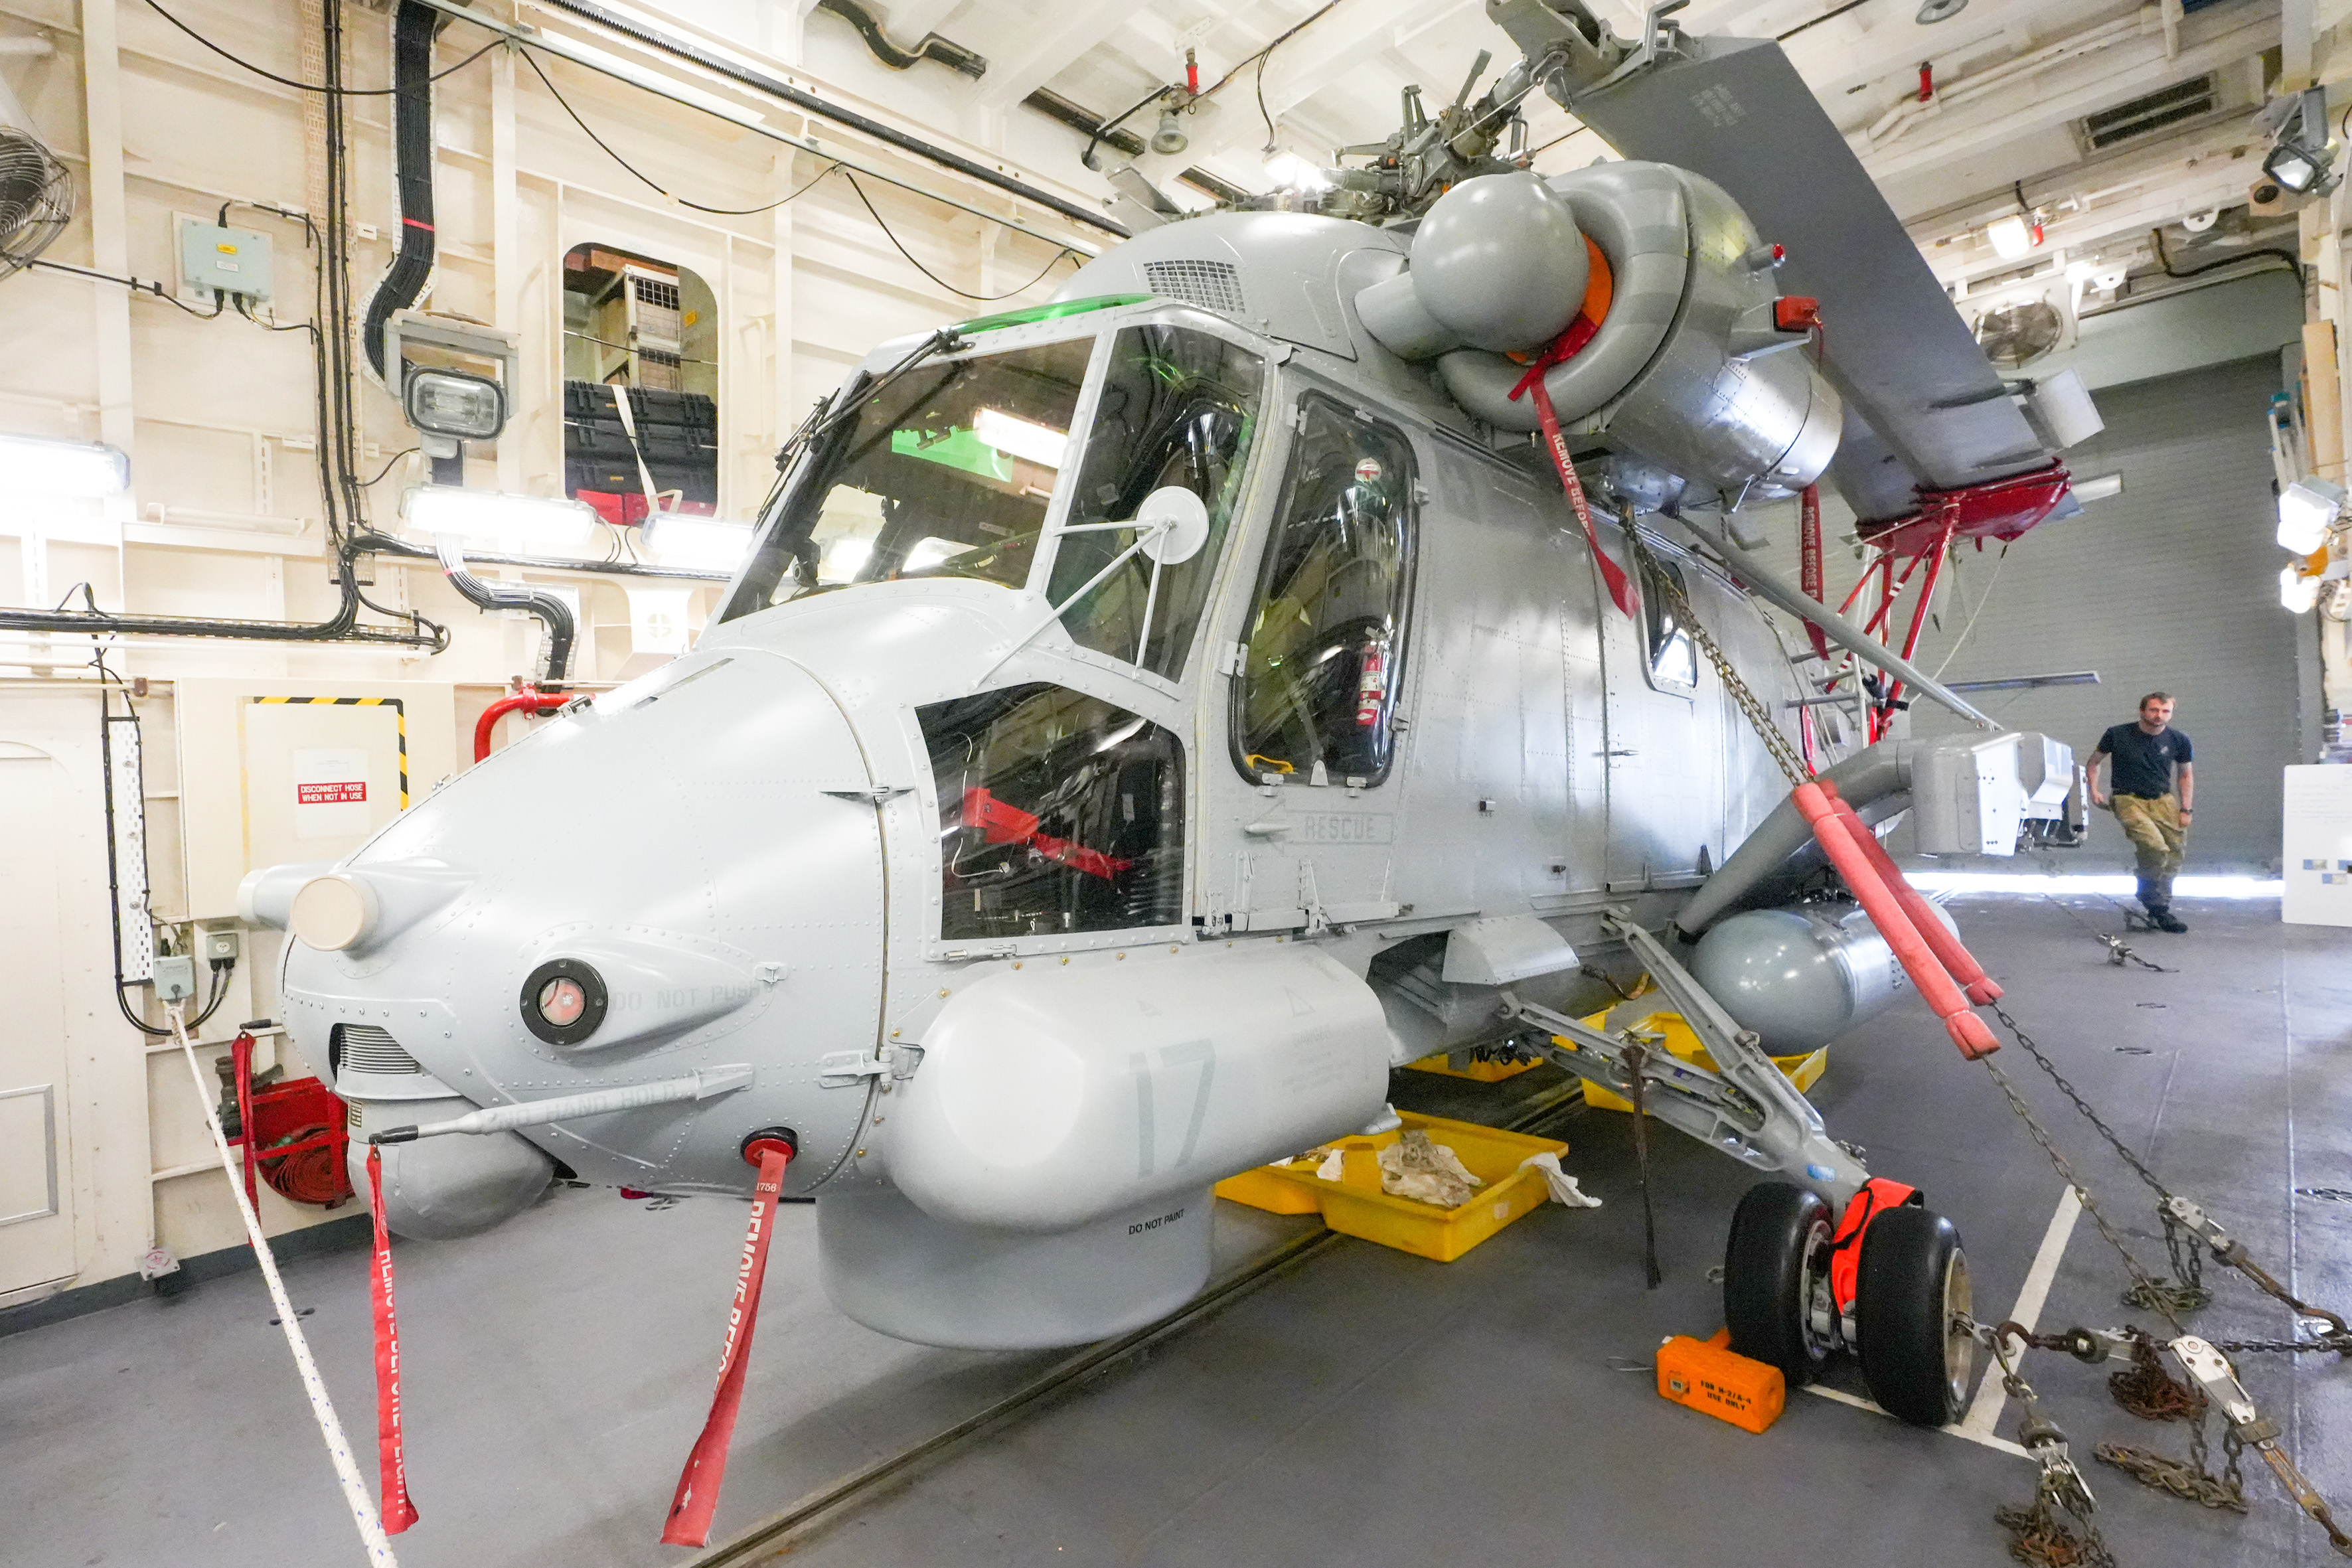 In response to Tuoi Tre (Youth) newspaper, a pilot on HMNZS Te Mana stated that the helicopter on board is used for training, rescue, and emergency activities. Photo: Huu Hanh / Tuoi Tre